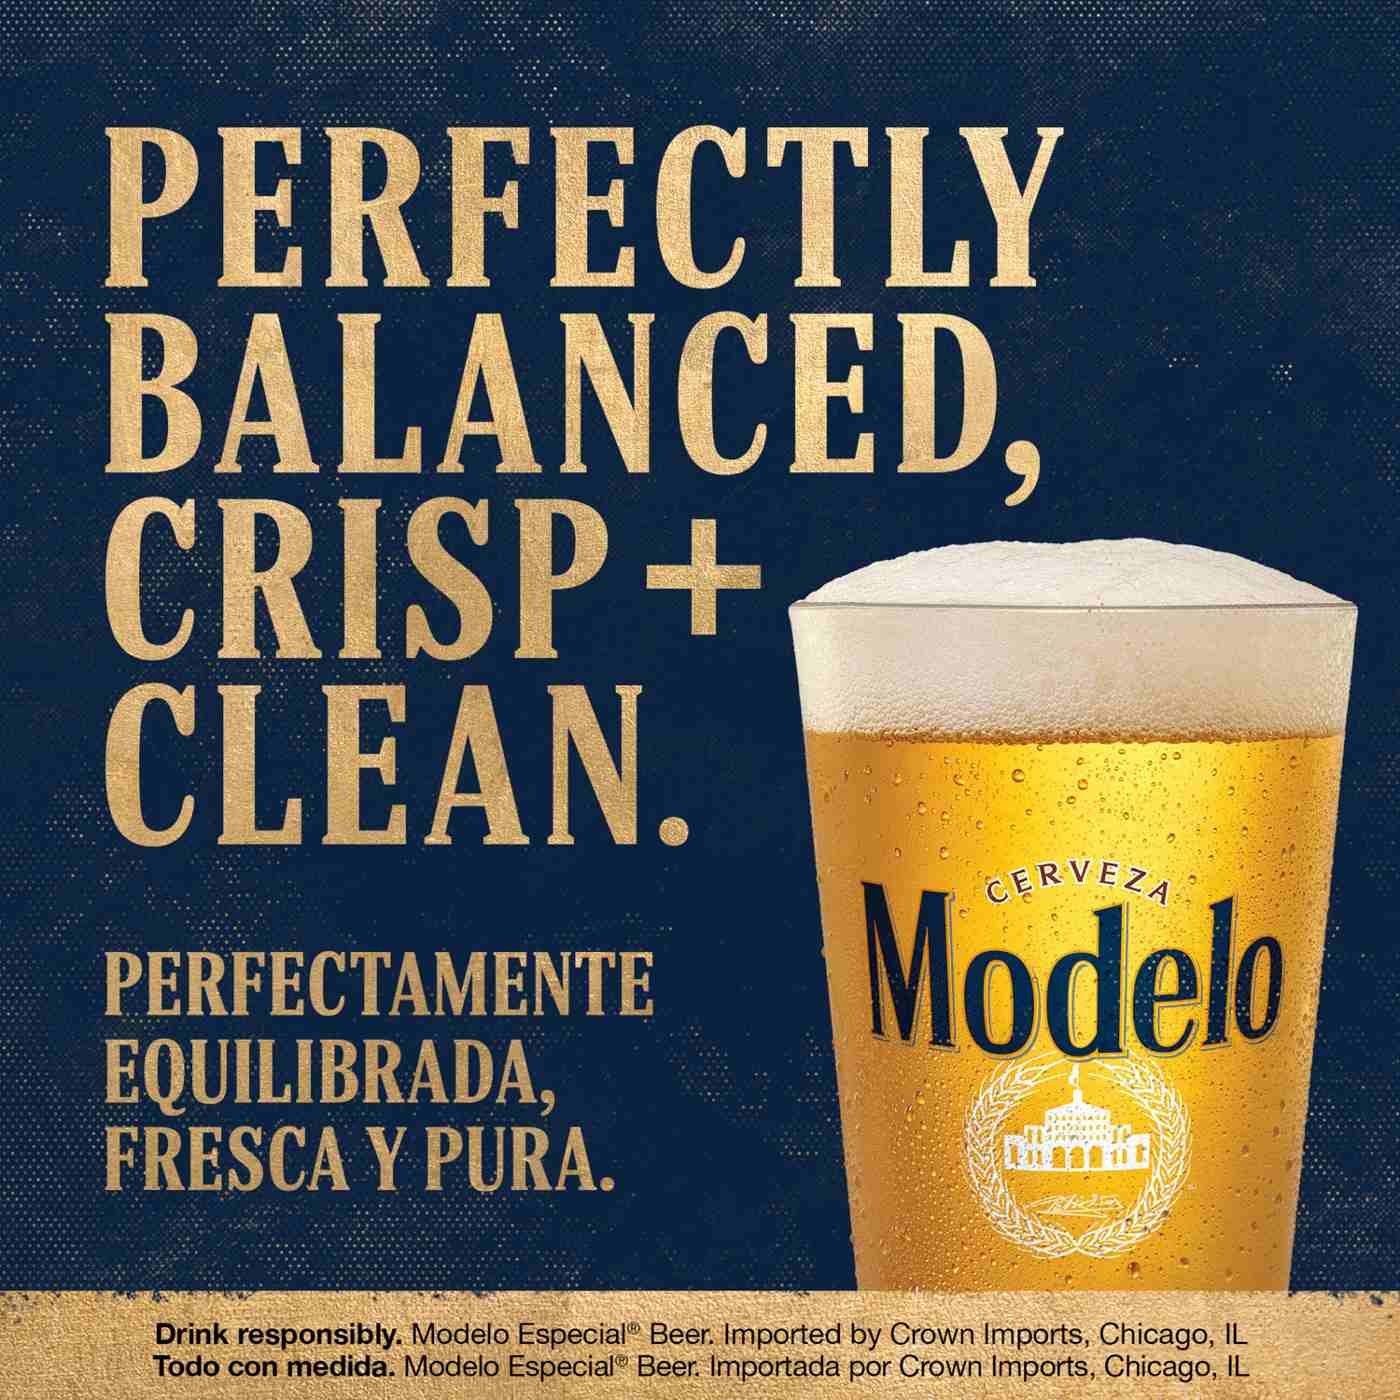 Modelo Especial Mexican Lager Import Beer 12 oz Cans, 24 pk; image 7 of 10